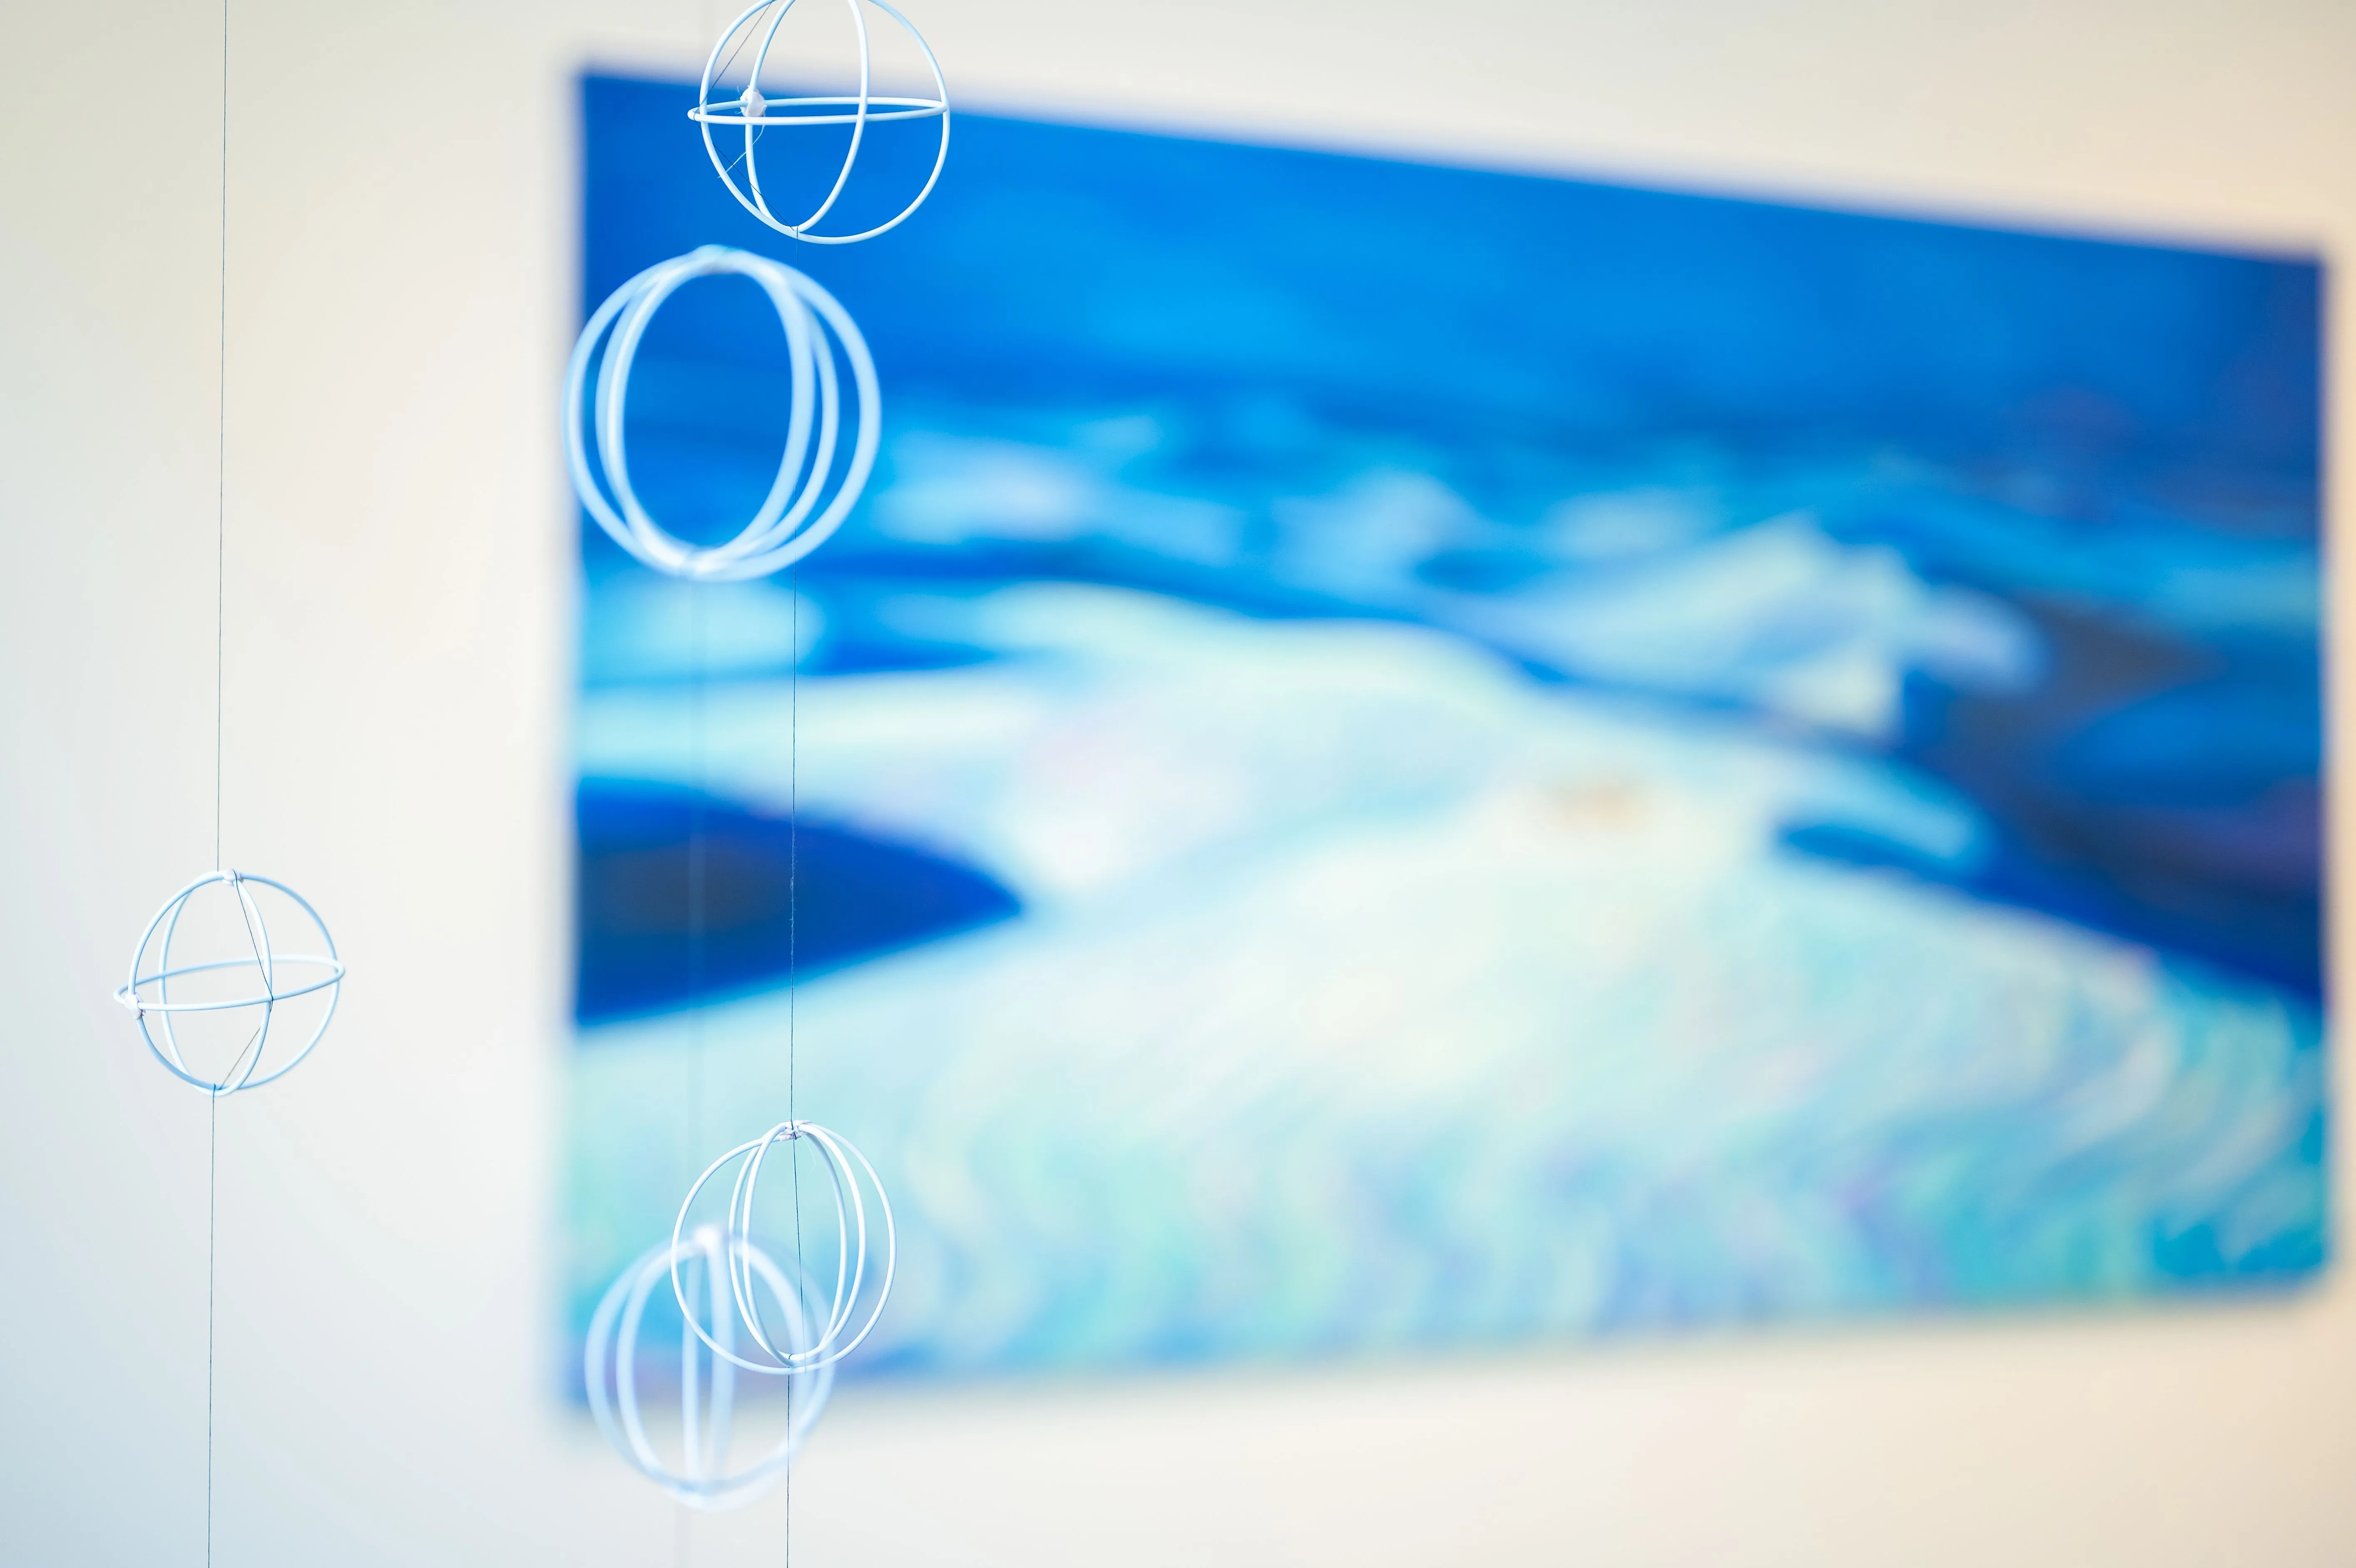 Blurred image of a canvas with abstract blue and white art on a wall, overlayed with transparent circles possibly representing artistic inspiration or creativity.